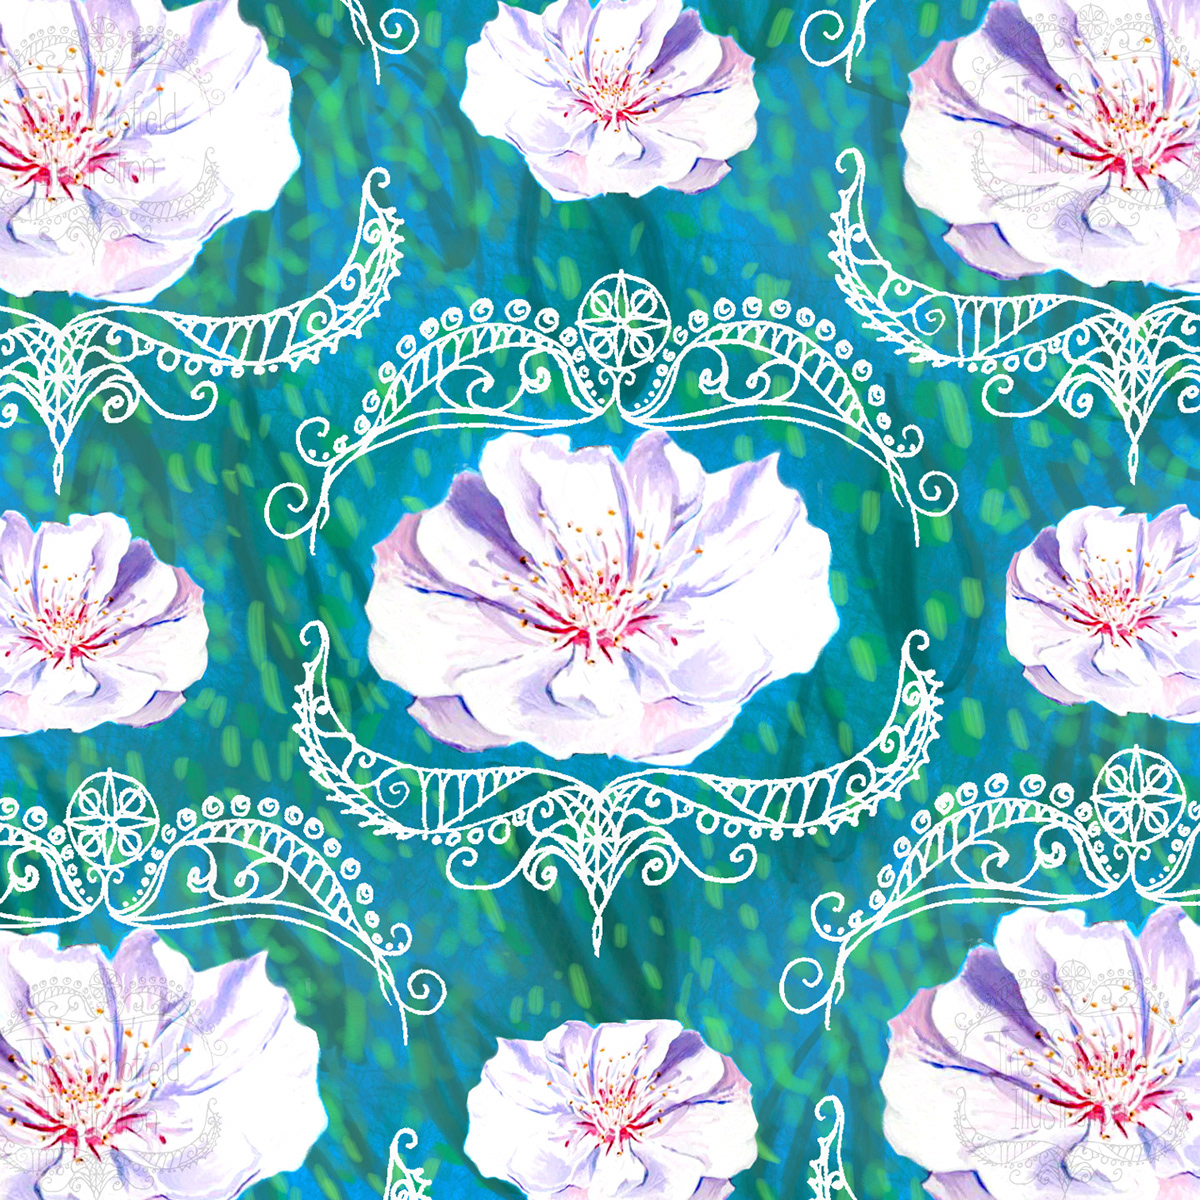 Lilly pattern whimsical interior decor Fabric patterns Flowers aqua water Nature